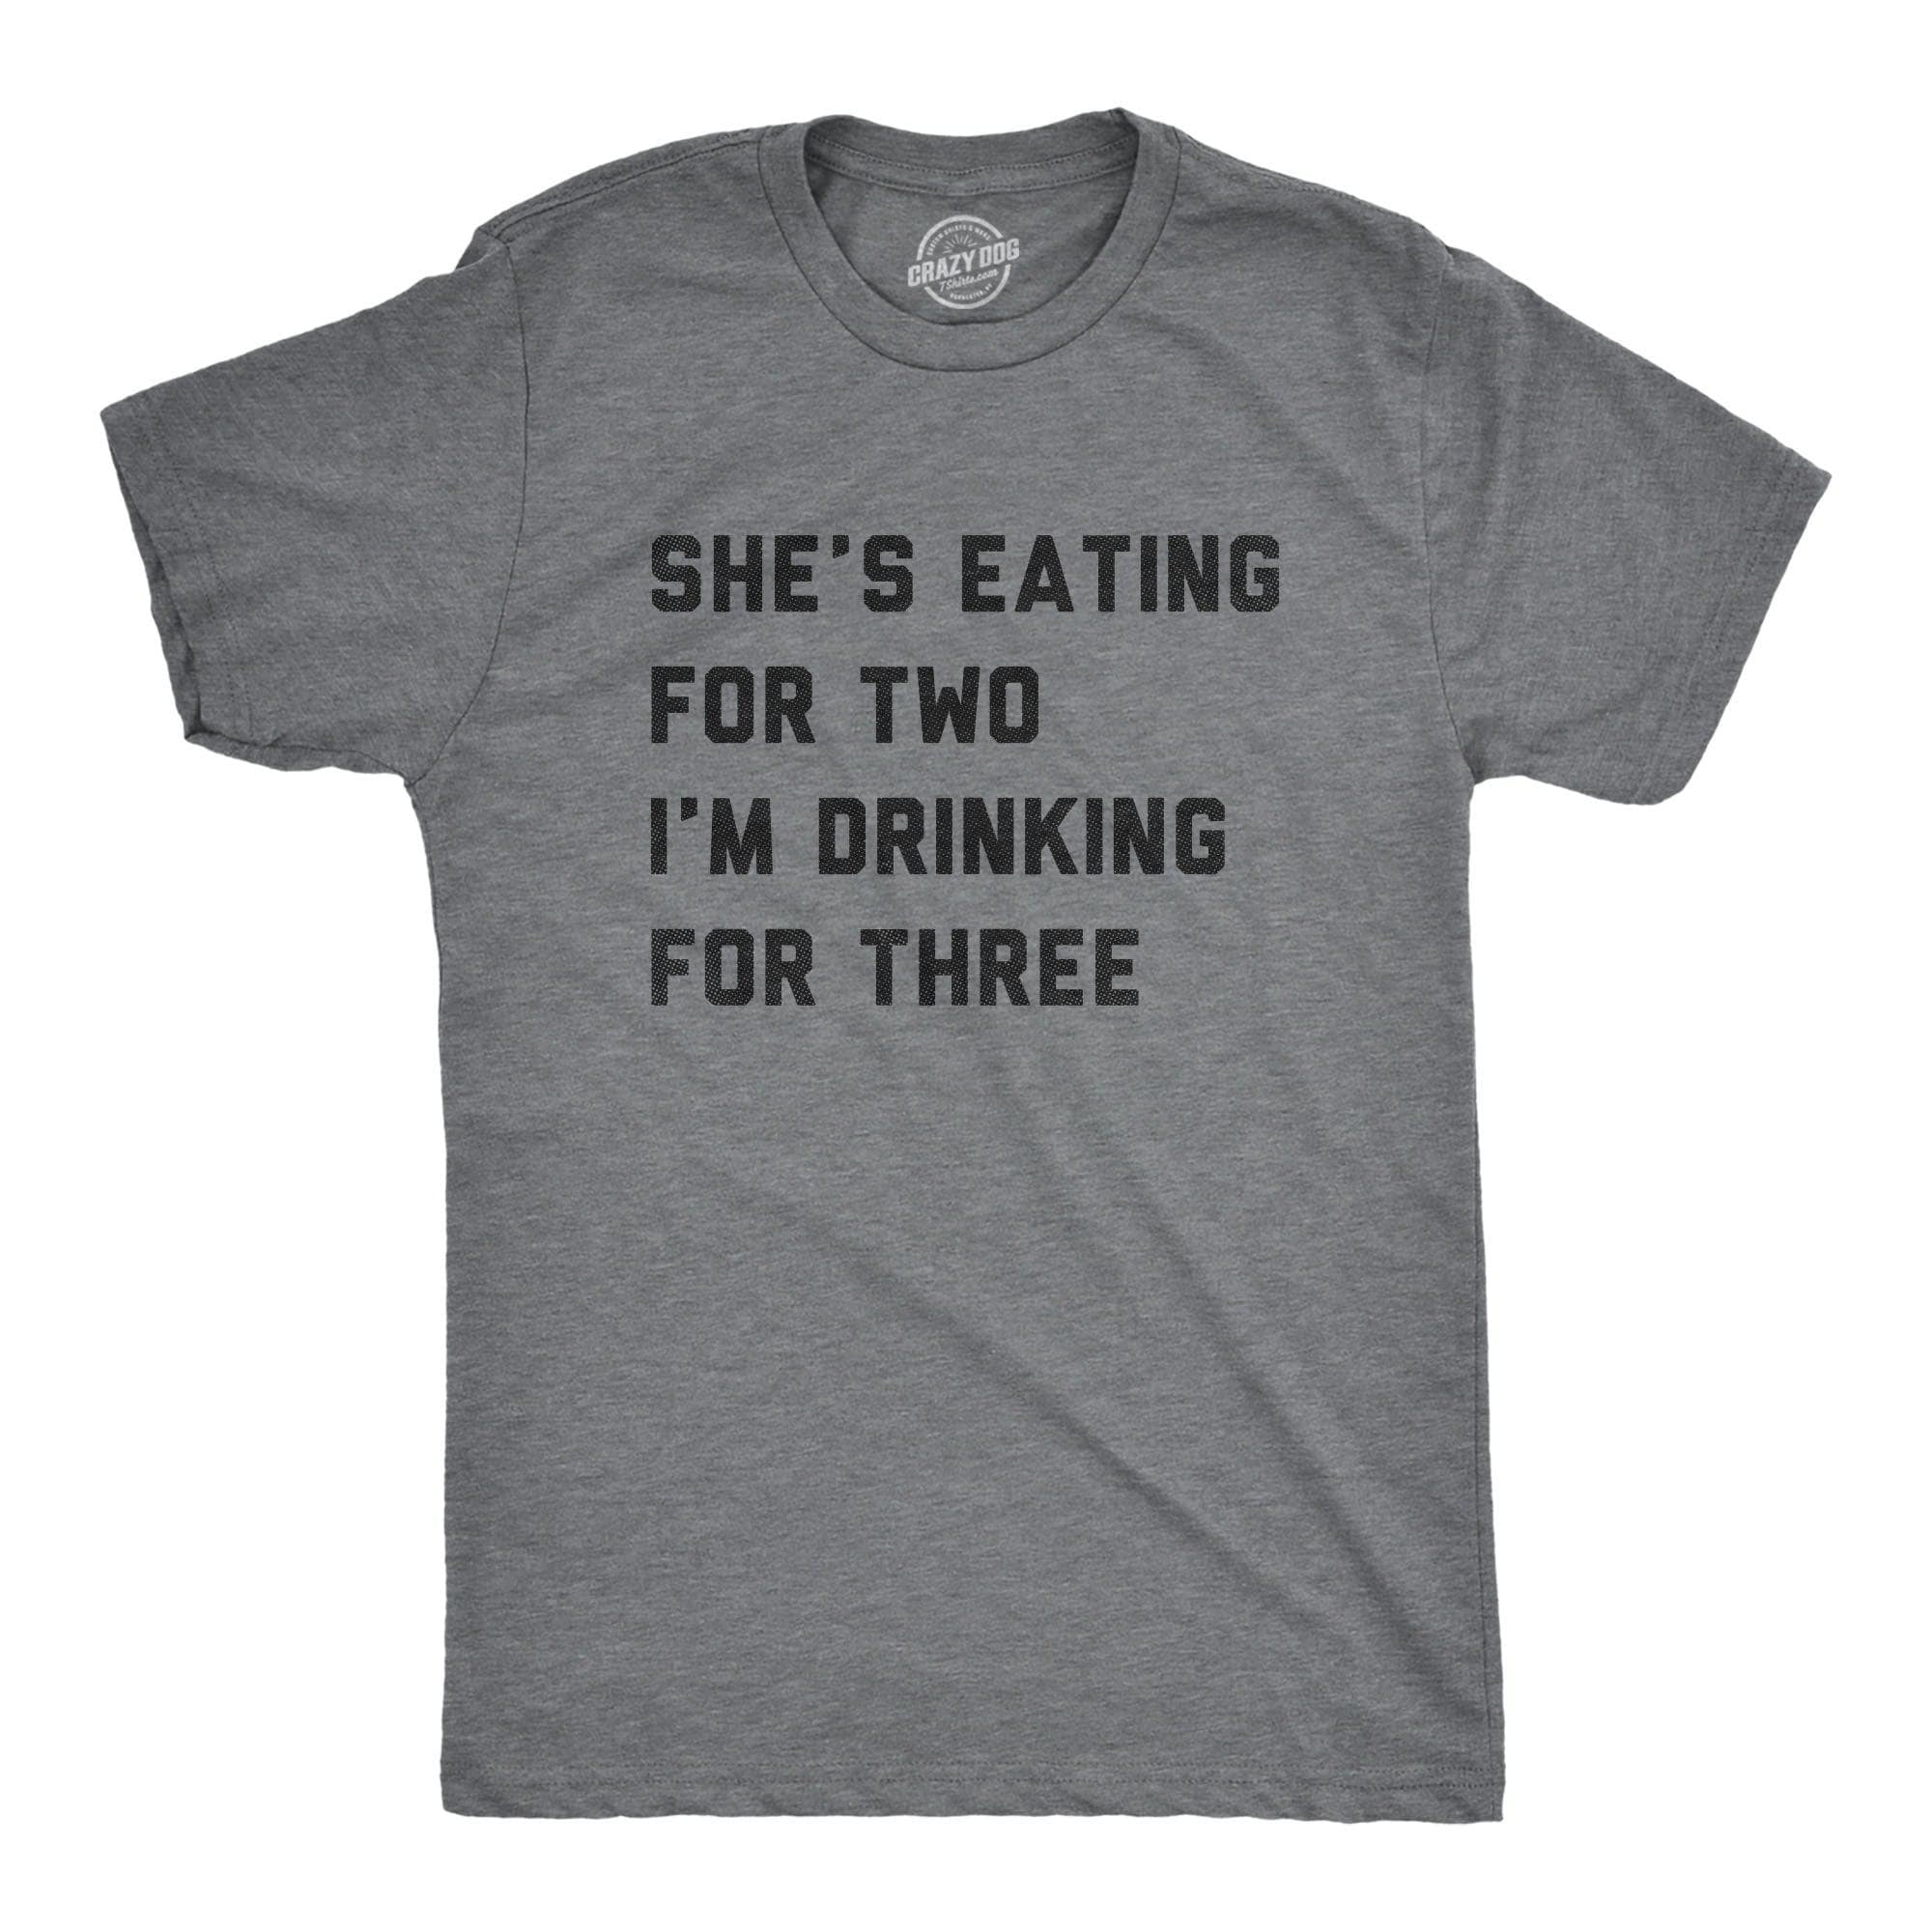 Shes Eating For Two Im Drinking For Three Men's Tshirt  -  Crazy Dog T-Shirts